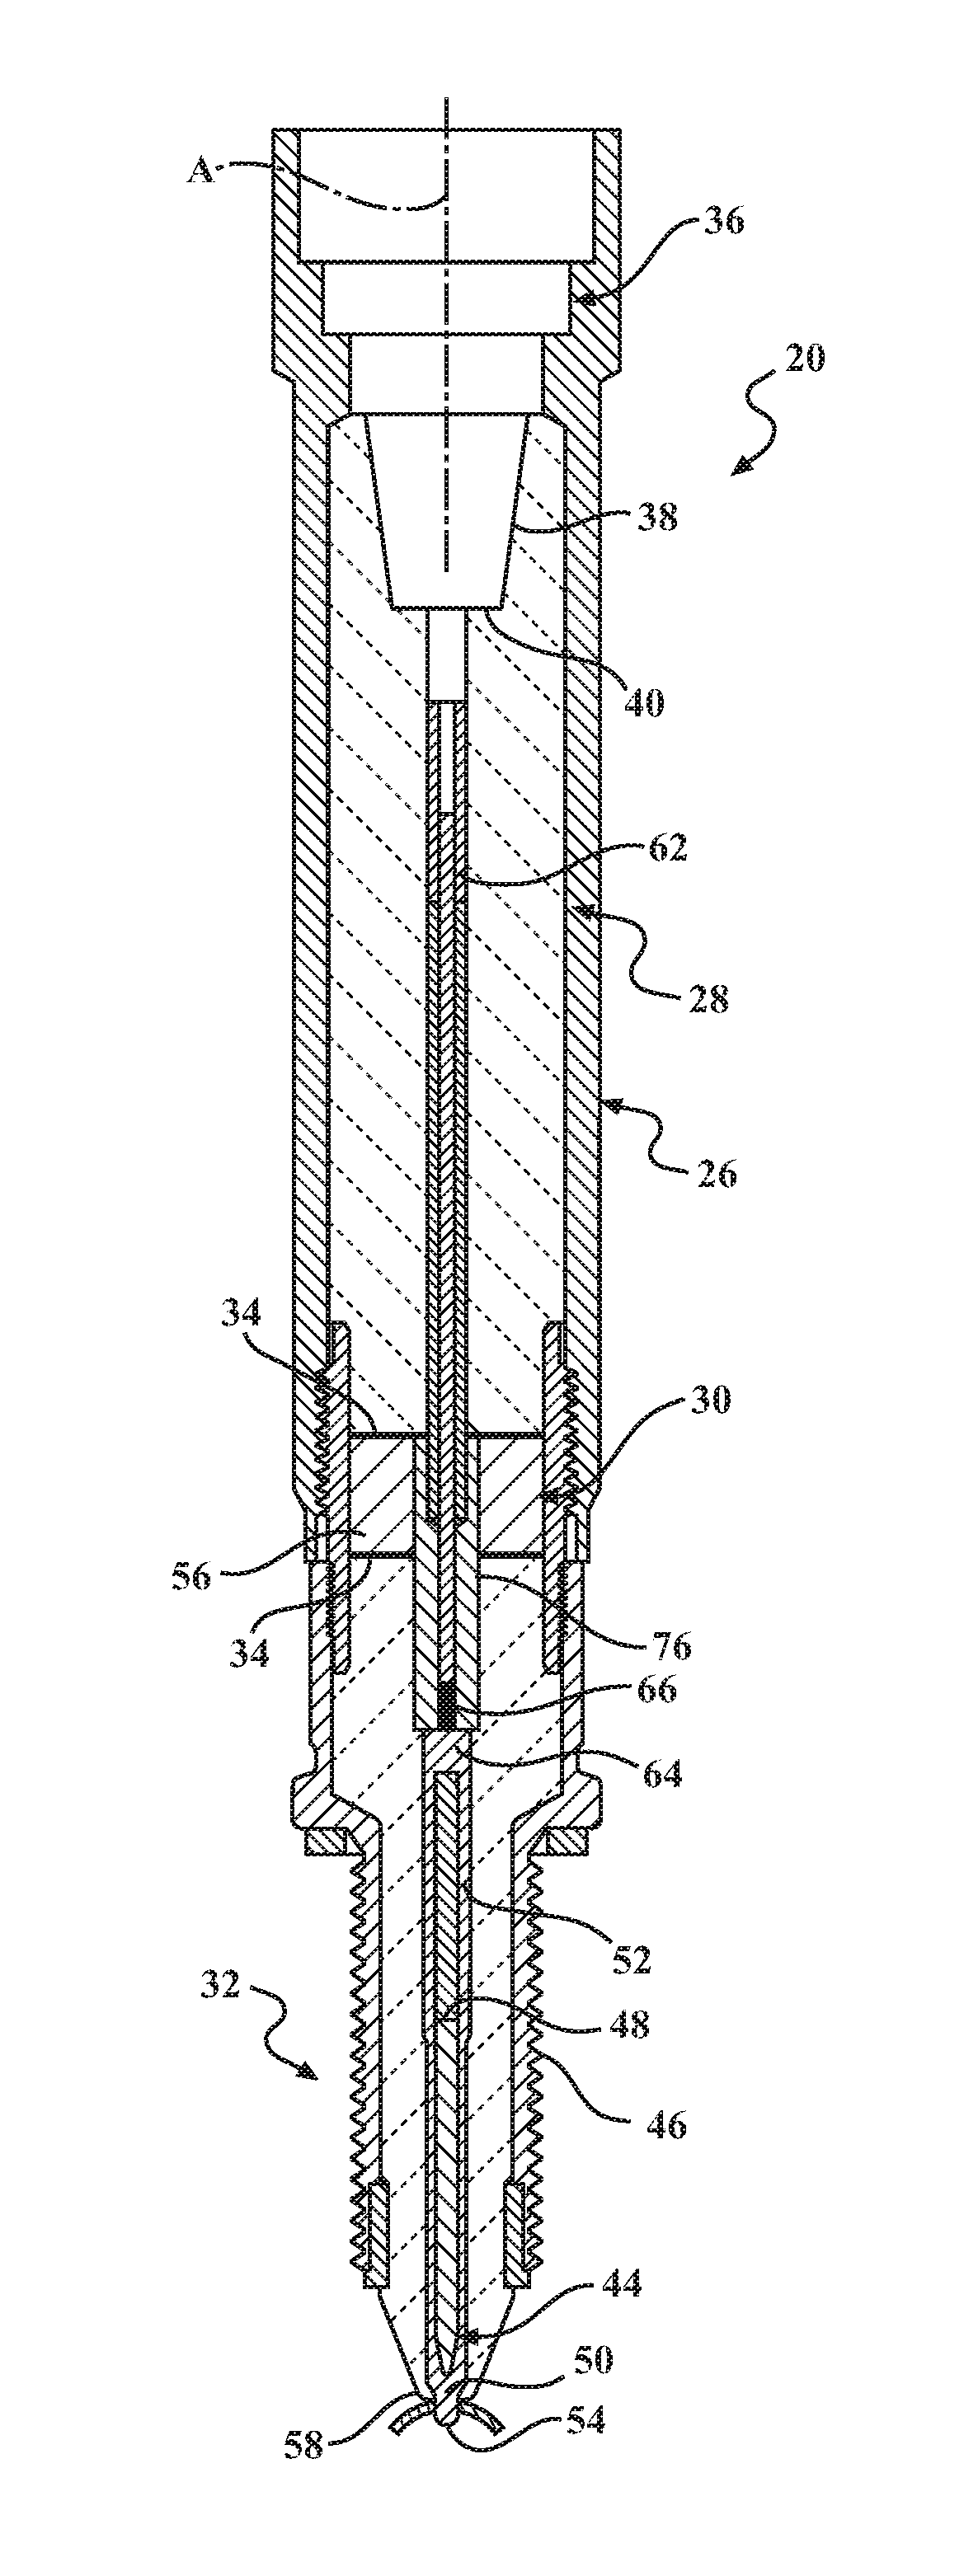 Corona suppression at the high voltage joint through introduction of a semi-conductive sleeve between the central electrode and the dissimilar insulating materials